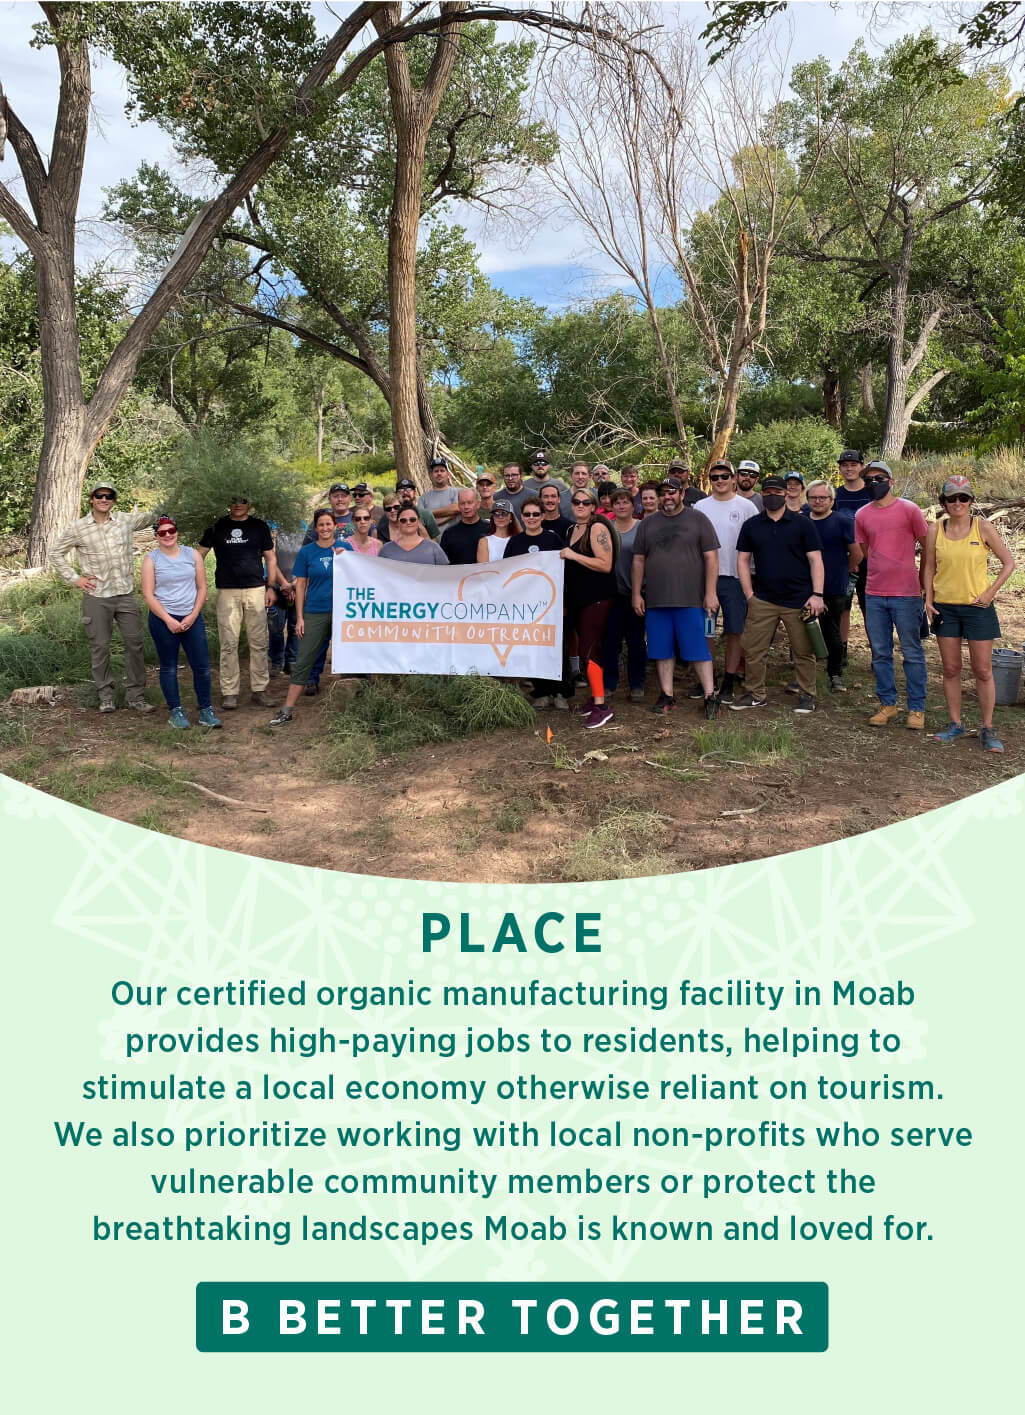 Our certified organic manufacturing facility in Moab provides high-paying jobs to residents, helping to stimulate a local economy otherwise reliant on tourism. We also prioritize working with local non-profits who serve vulnerable community members or protect the breathtaking landscapes Moab is known and loved for.